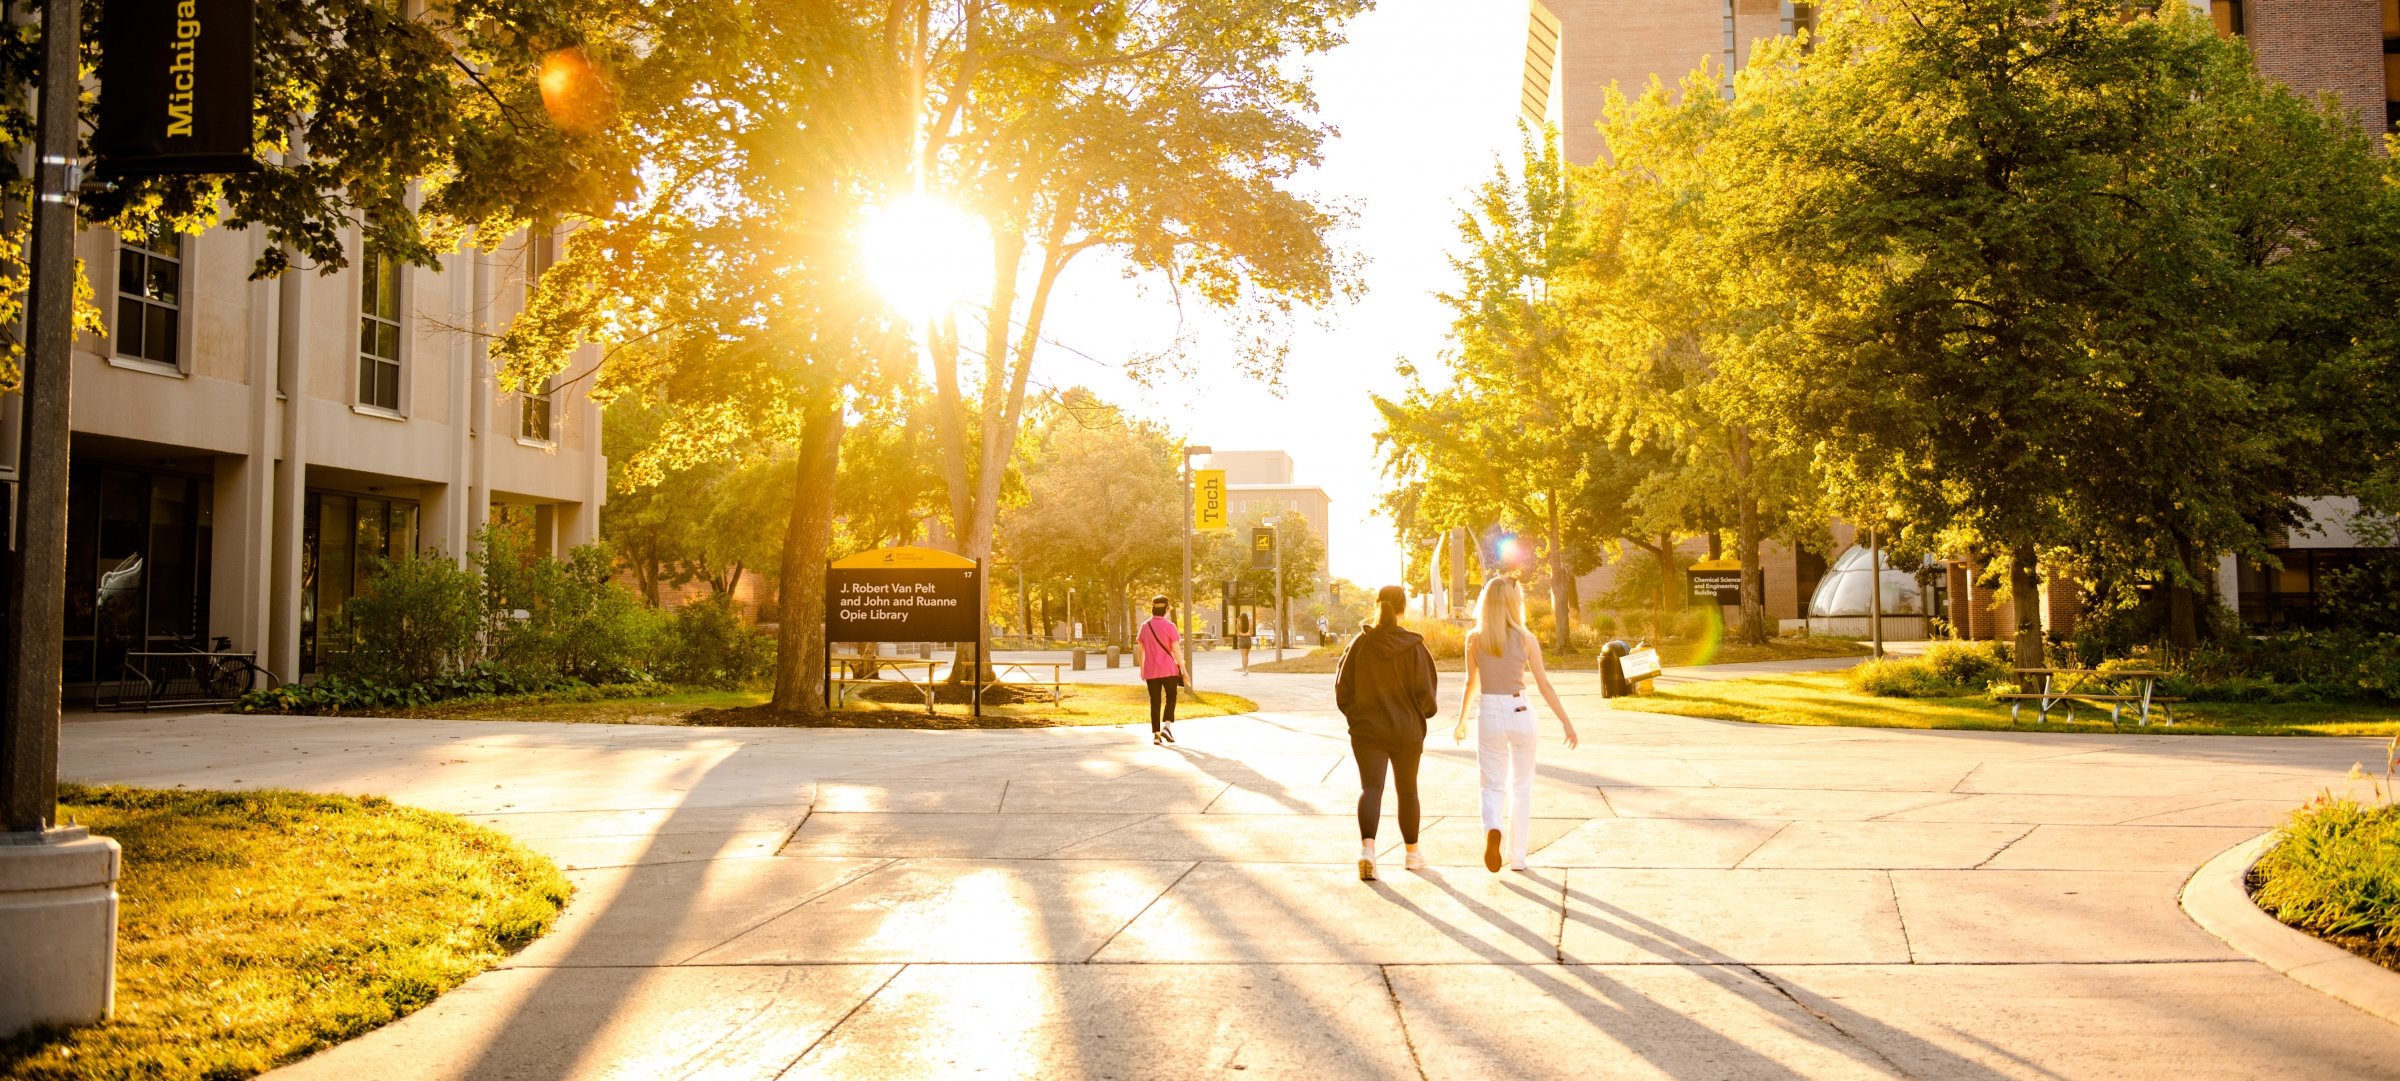 Michigan Technological University's campus at dawn with students walking